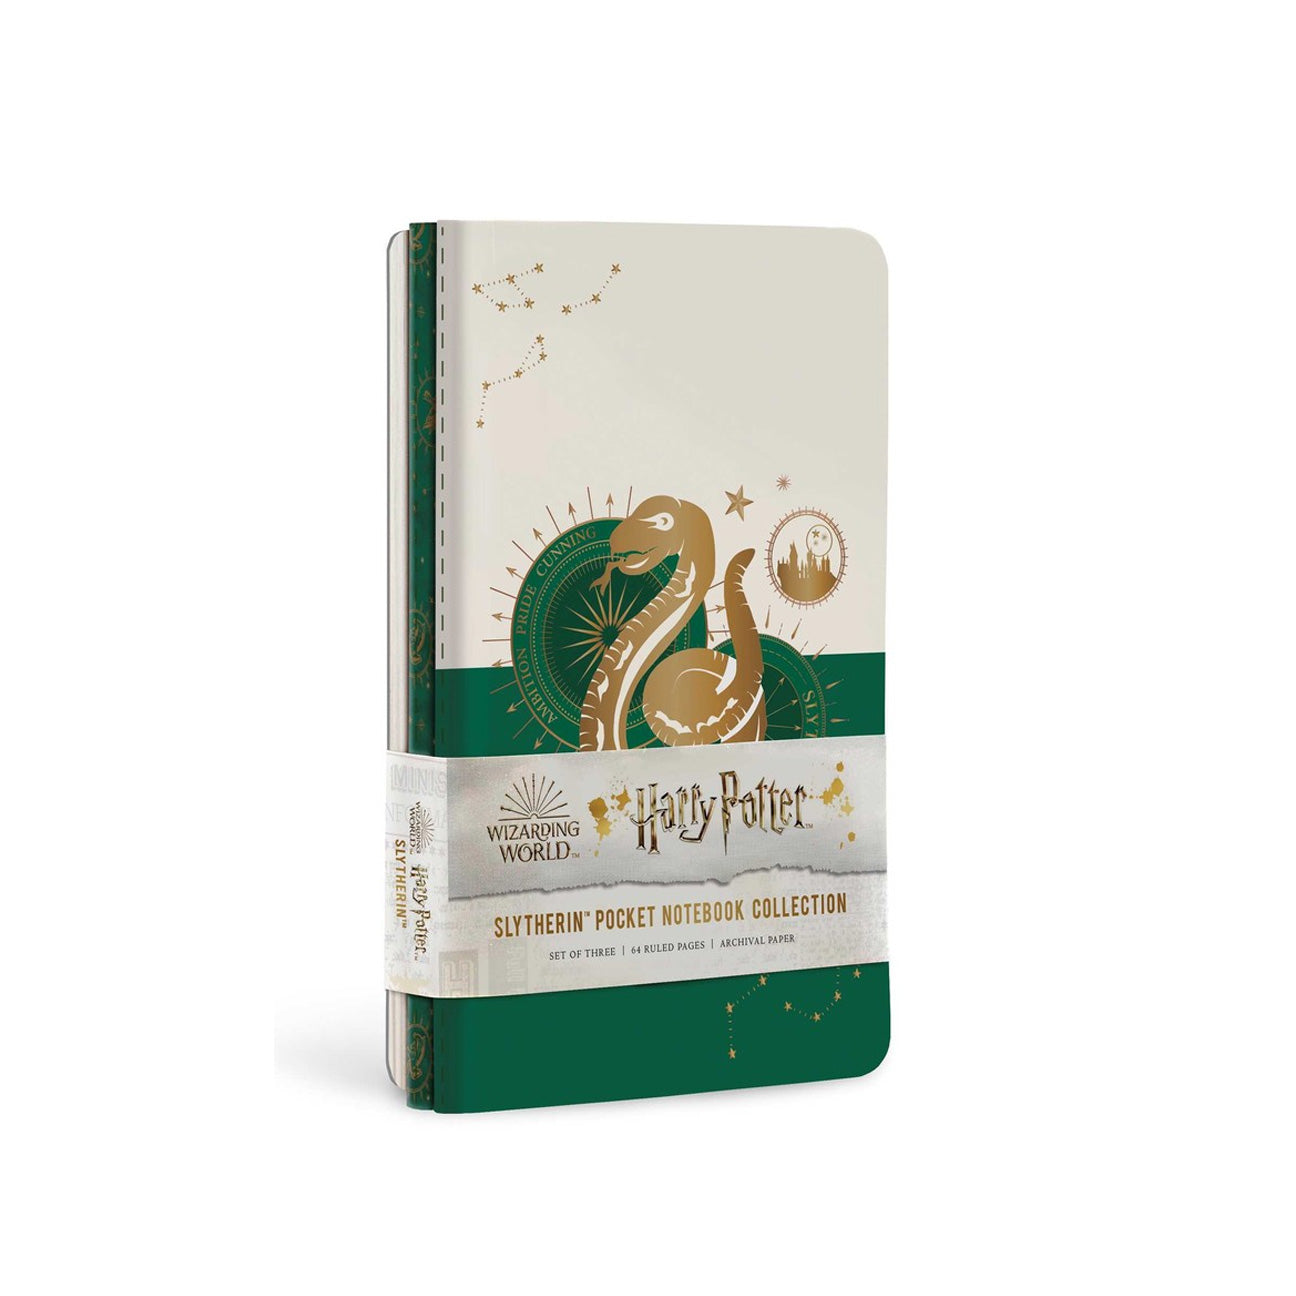 Slytherin Constellation Pocket Notebook Collection, Set of 3